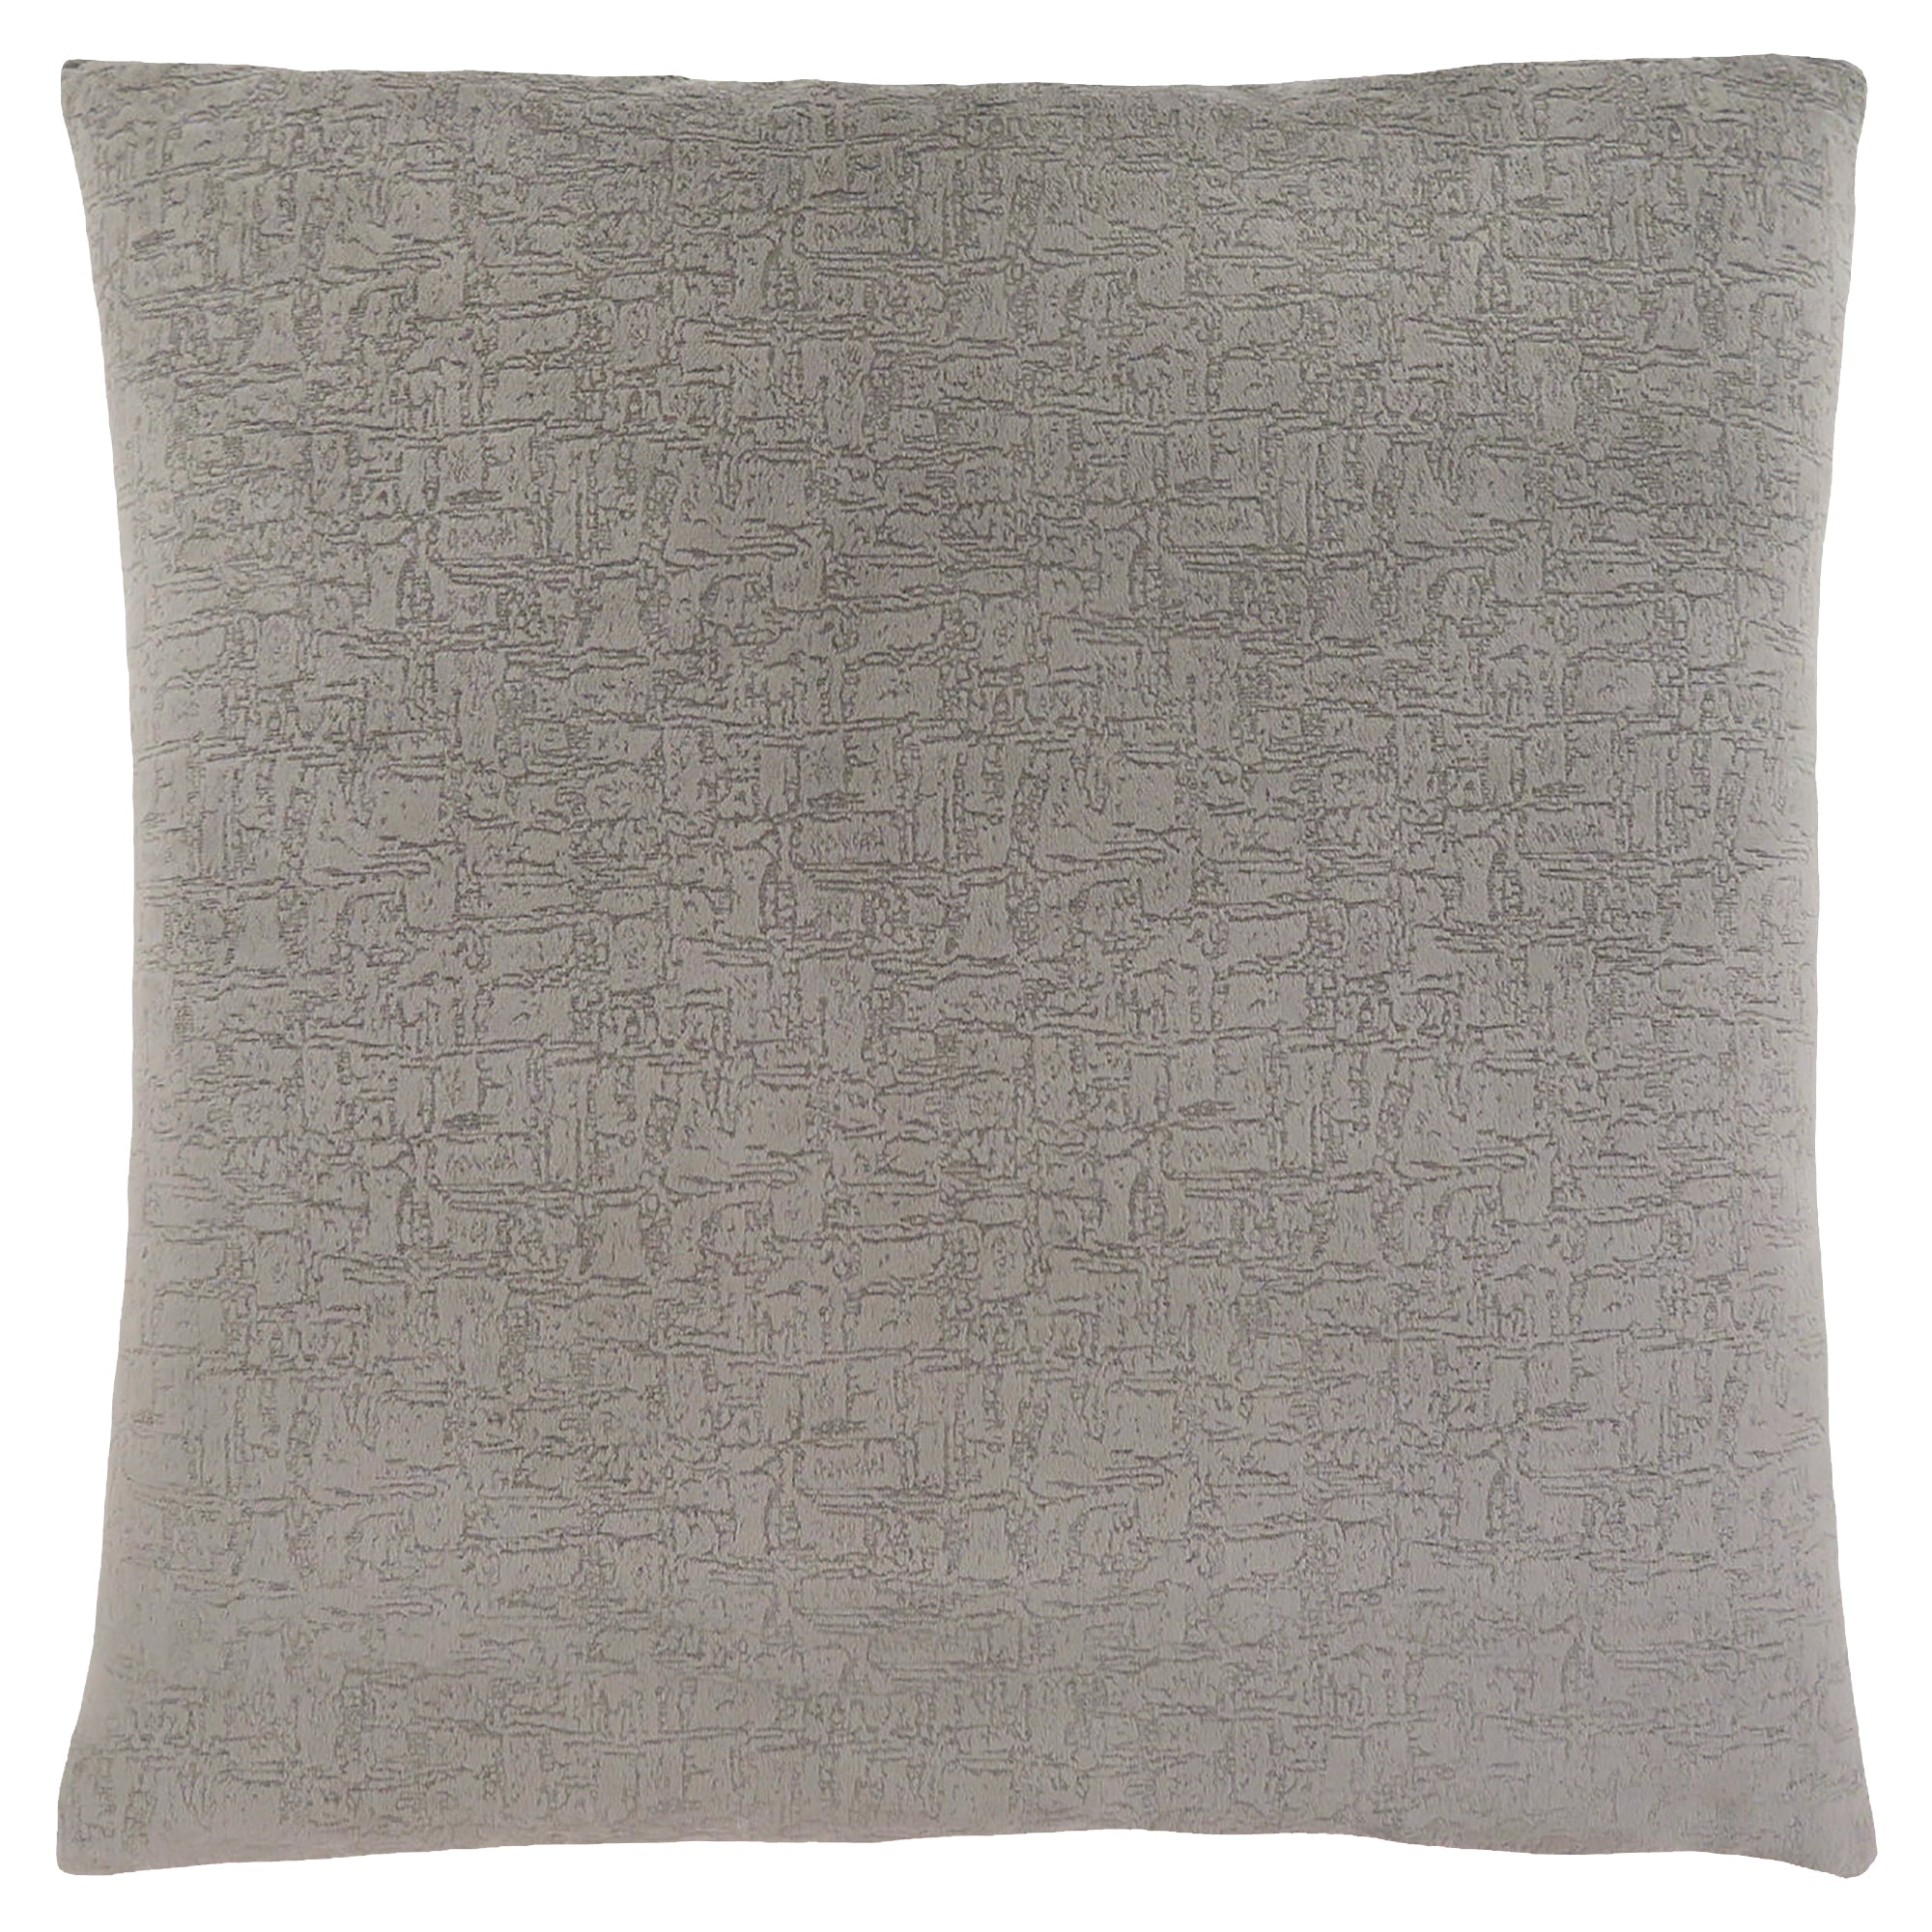 MN-709272    Pillows, 18 X 18 Square, Insert Included, Decorative Throw, Accent, Sofa, Couch, Bed, Plush Velvet Finish, Soft Polyester Fabric, Hypoallergenic Soft Polyester Insert, Grey, Contemporary, Modern